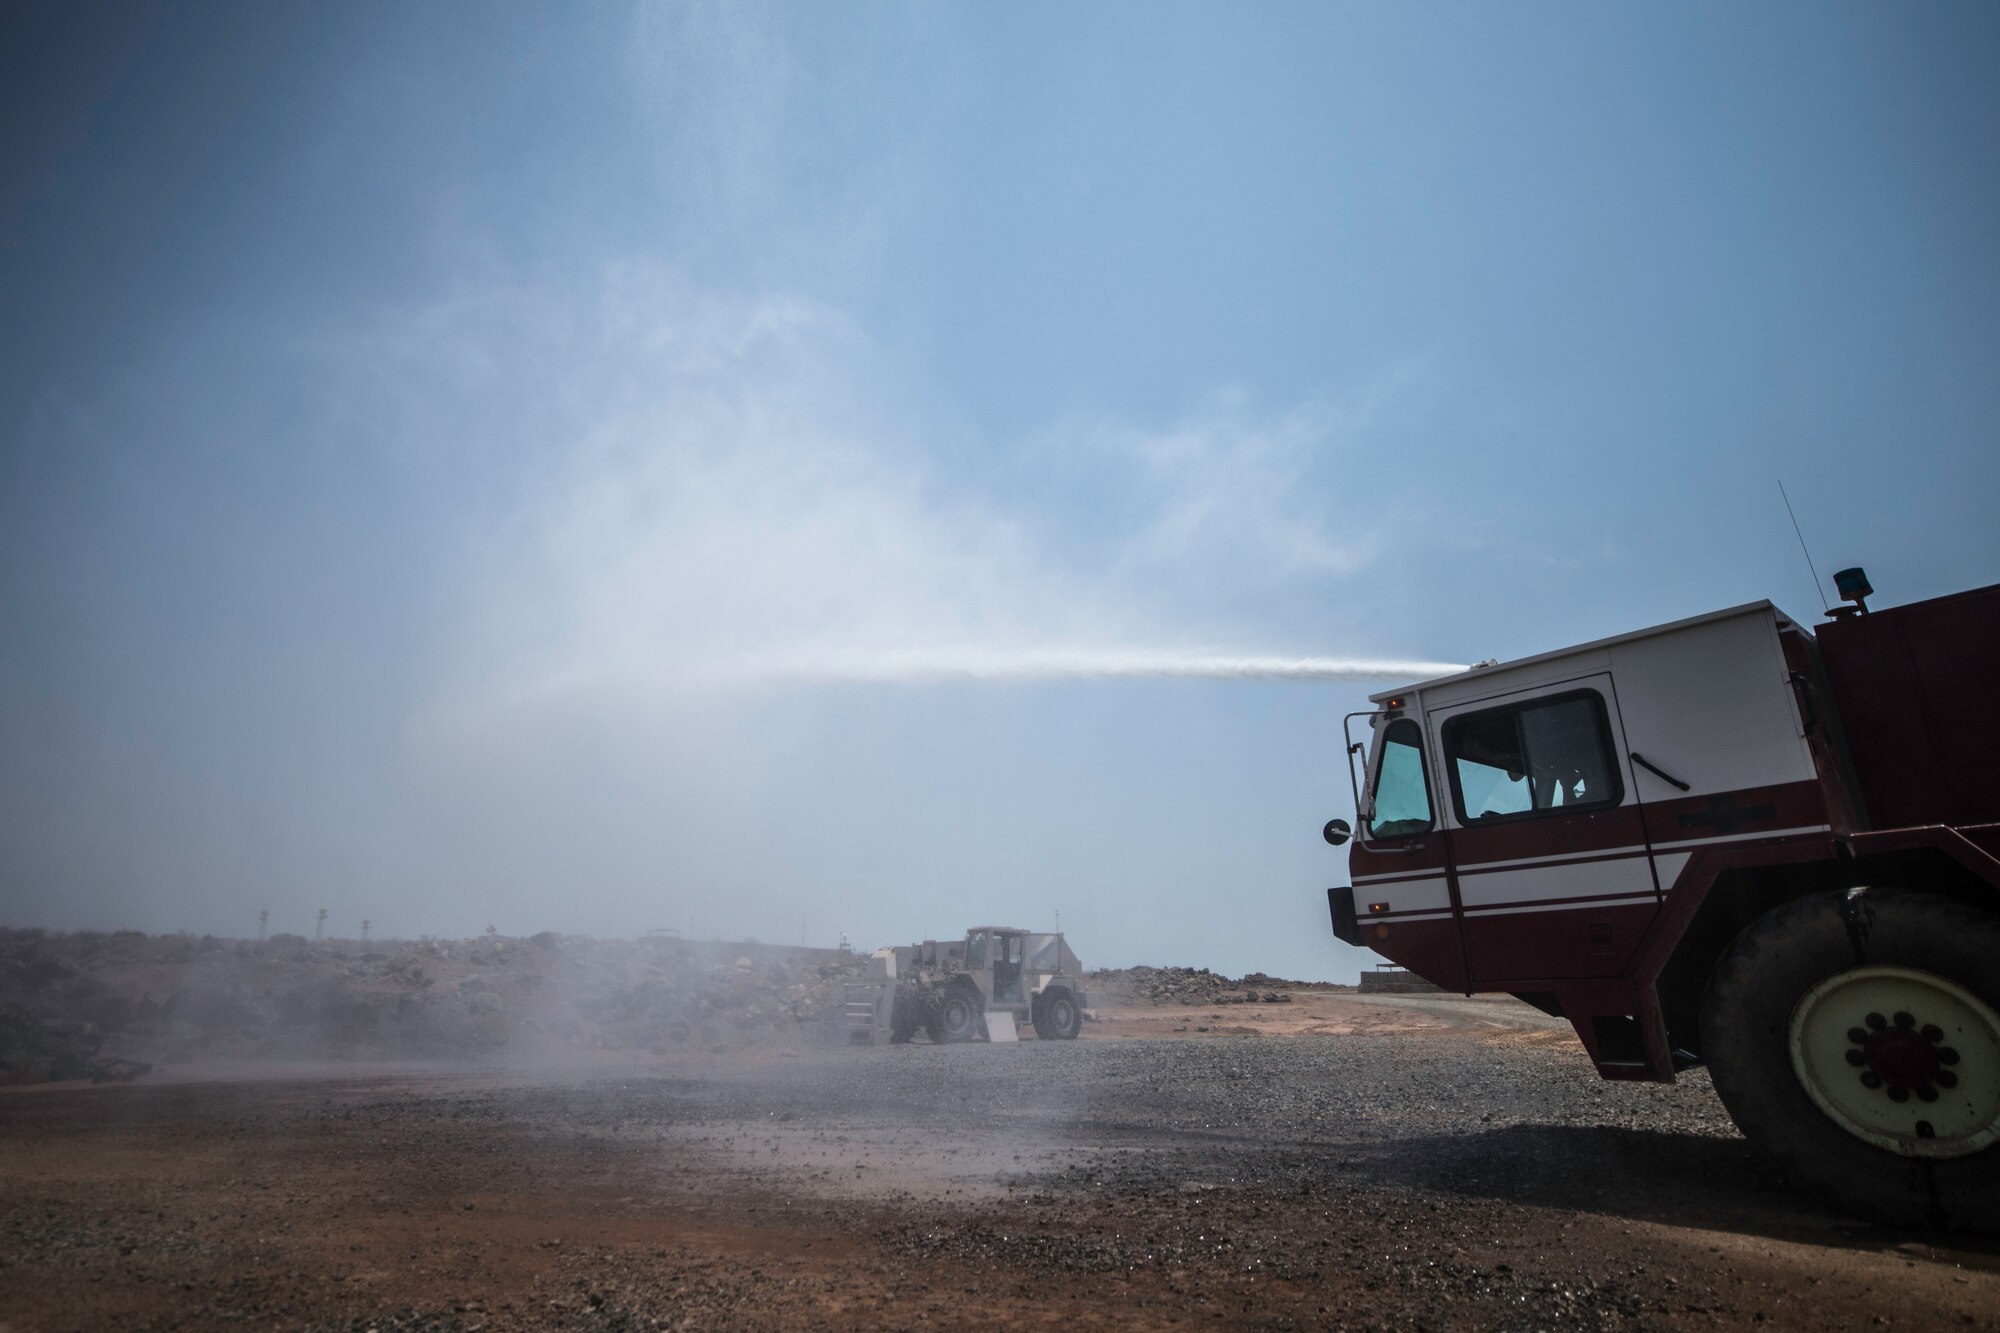 U.S. Air Force Airman 1st Class Anthon Williams, 870th Air Expeditionary Squadron firefighter, tests a fire truck hose at Chabelley Airfield, Djibouti, June 11, 2019. The 870th AES firefighters support the mission in East Africa by providing emergency services to the 449th Air Expeditionary Group and their assets. (U.S. Air Force photo by Staff Sgt. Devin Boyer)